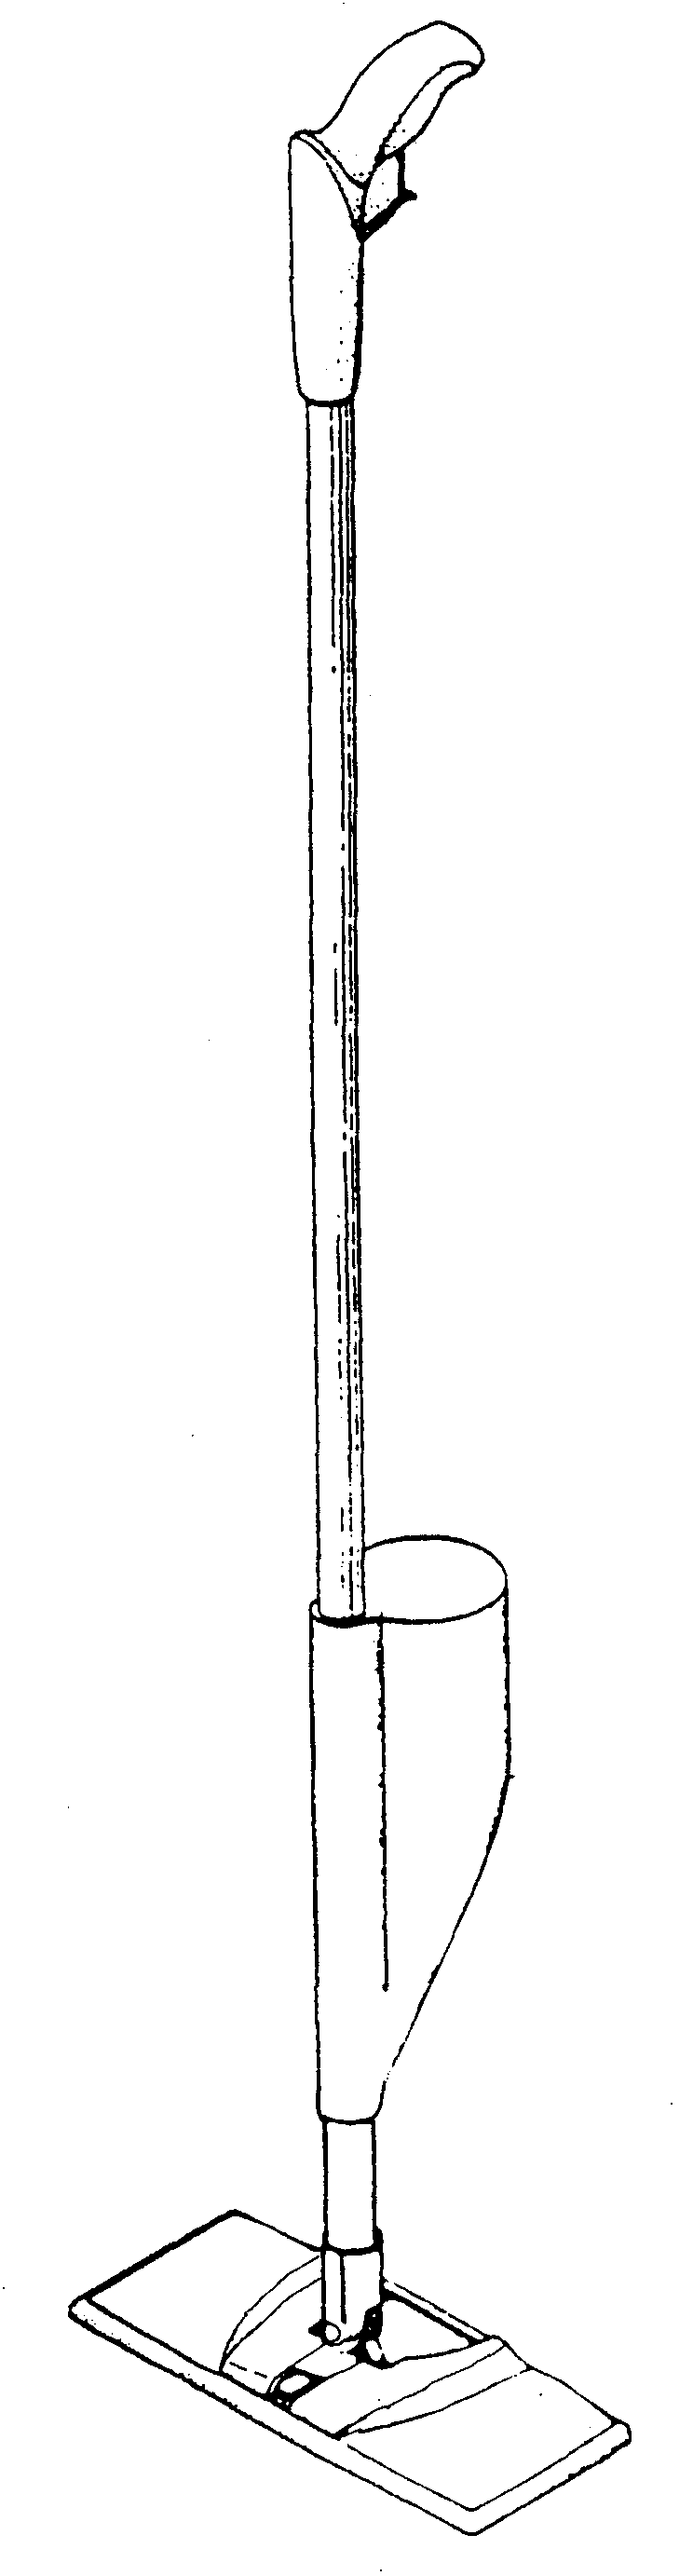 A cleaning implement having high absorbent capacity